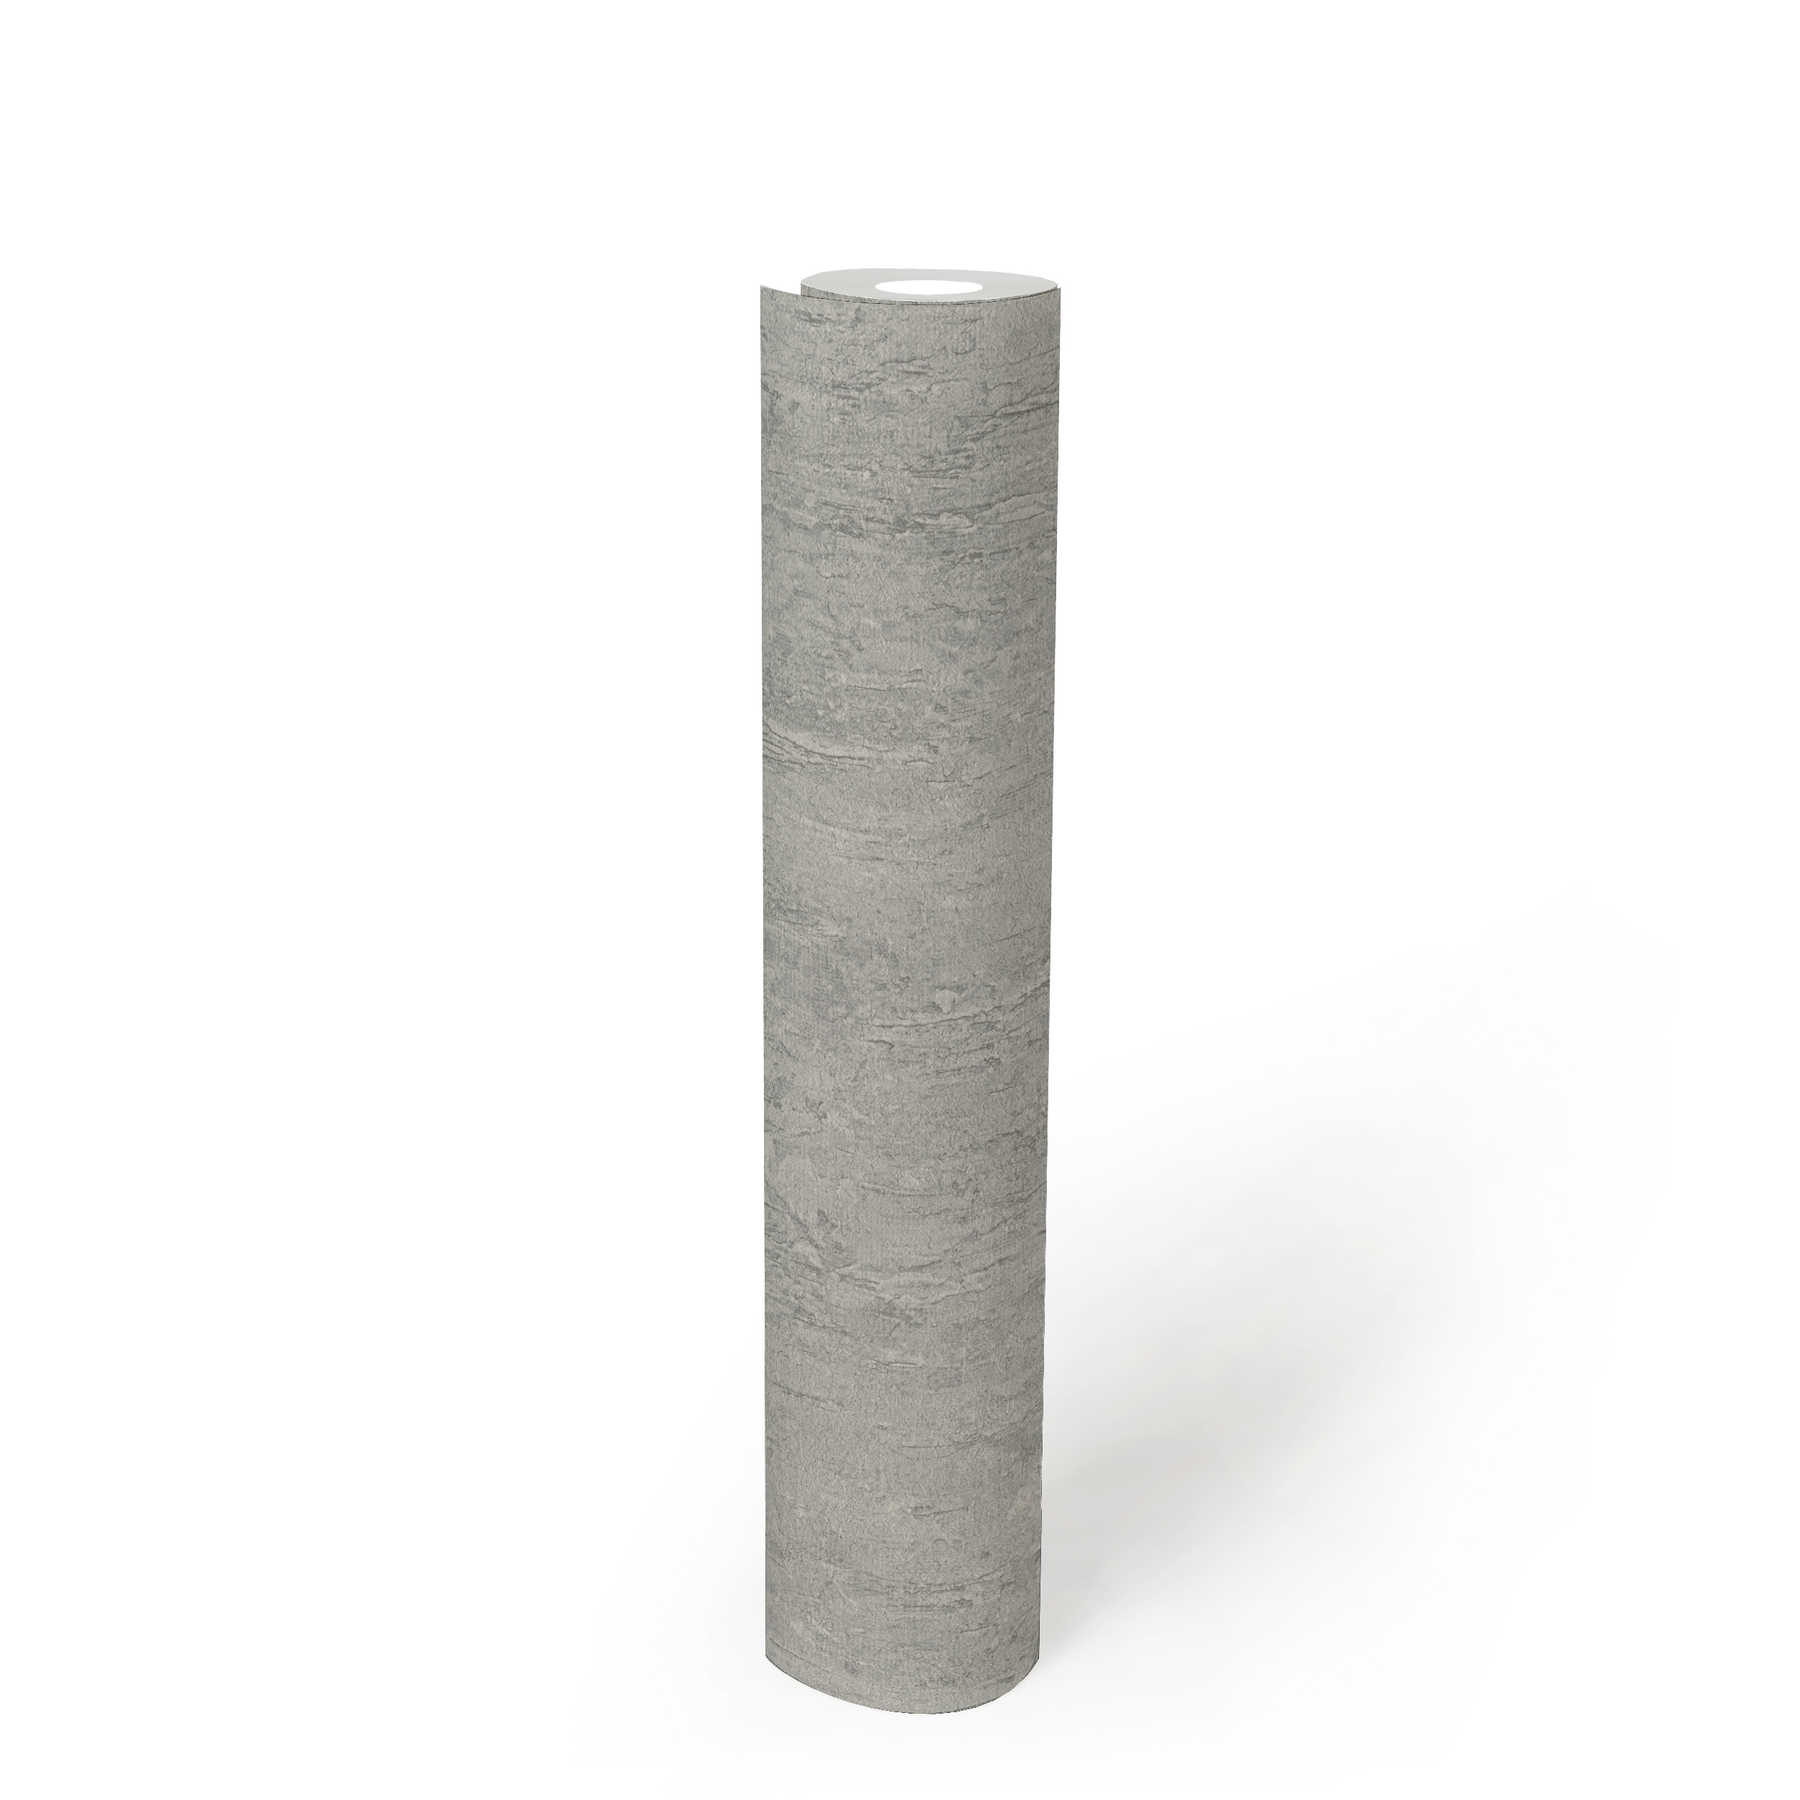             Non-woven wallpaper with natural textured pattern and concrete look - grey
        